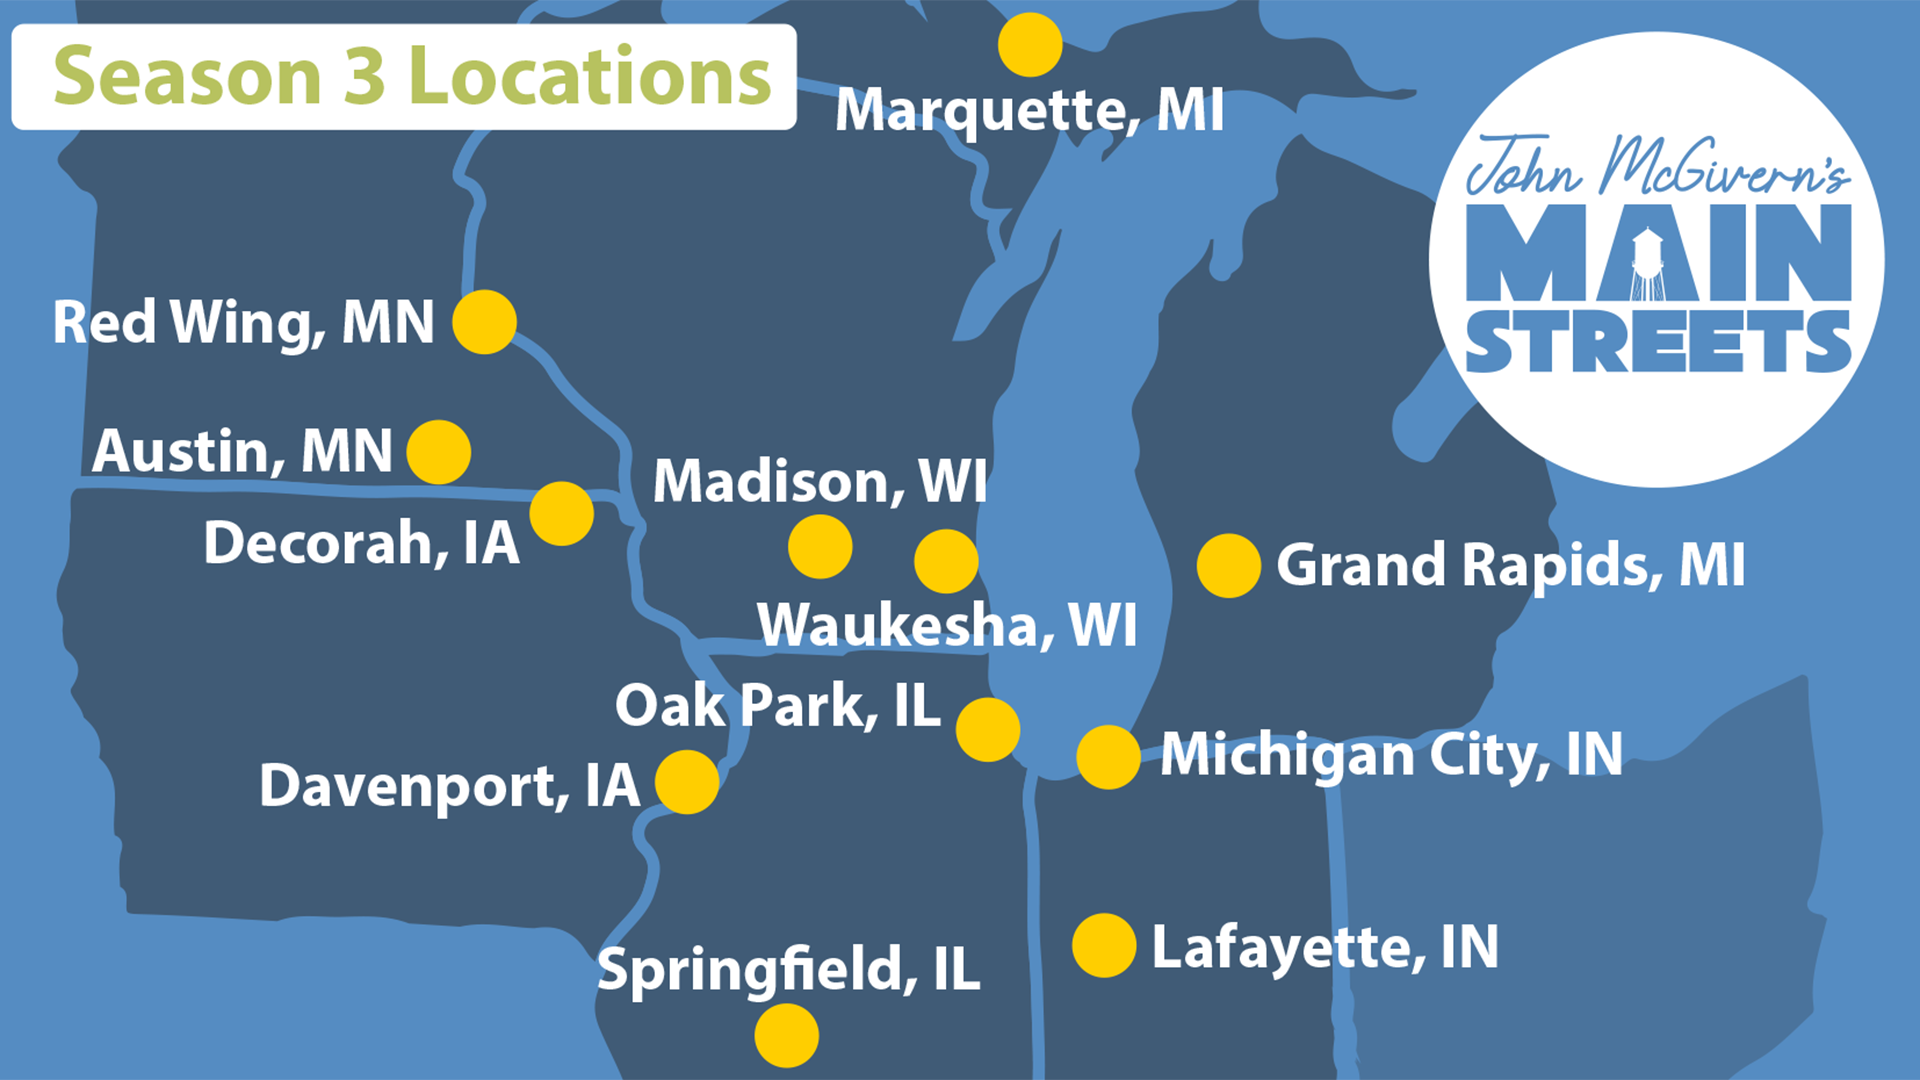 A blue cutout map of the Upper Midwest features yellow dots placed on 12 cities featured in the new season of John McGivern's Main Streets - Marquette, Michigan; Red Wing, Minnesota; Austin, Minnesota; Decorah, Iowa; Davenport, Iowa; Madison, Wisconsin; Waukesha, Wisconsin; Oak Park, Illinois; Springfield, Illinois; Lafayette, Indiana; Michigan City, Indiana; Grand Rapids, Michigan.